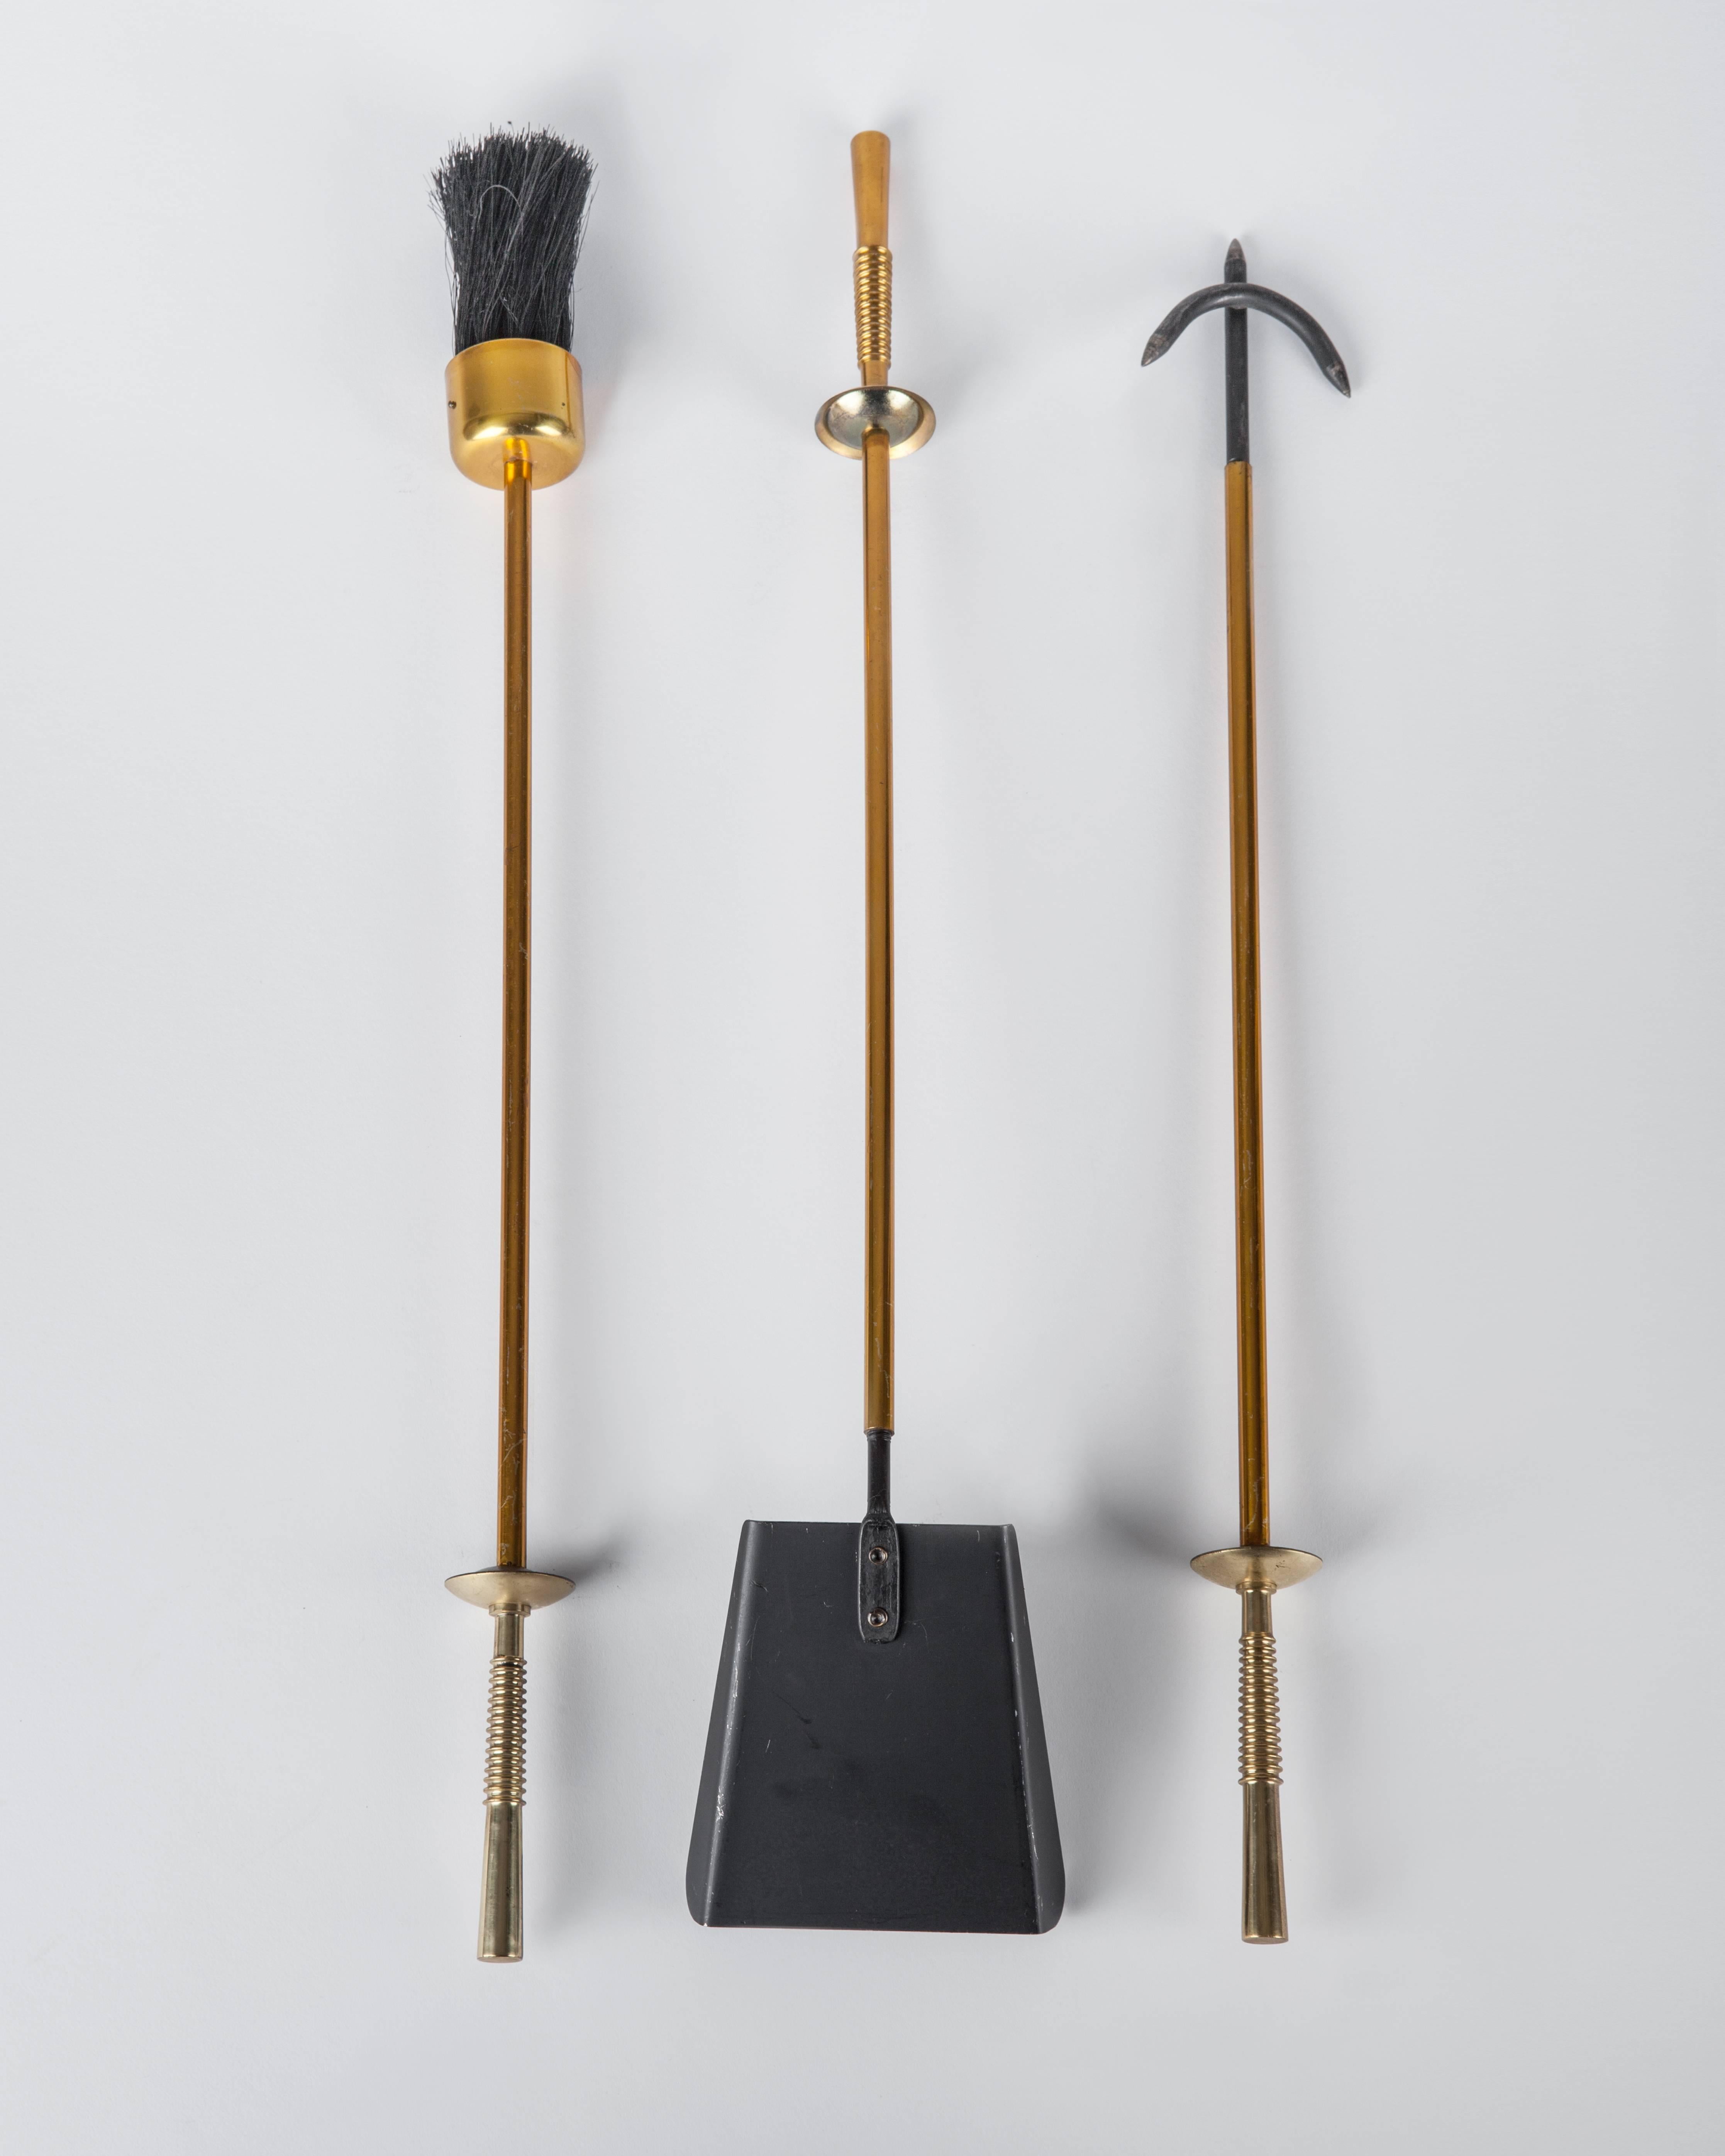 AFP0527,
a set of three modern fireplace tools (poker, shovel, and brush) with matching holder in brass and blackened steel.

Dimensions:
Overall: 27